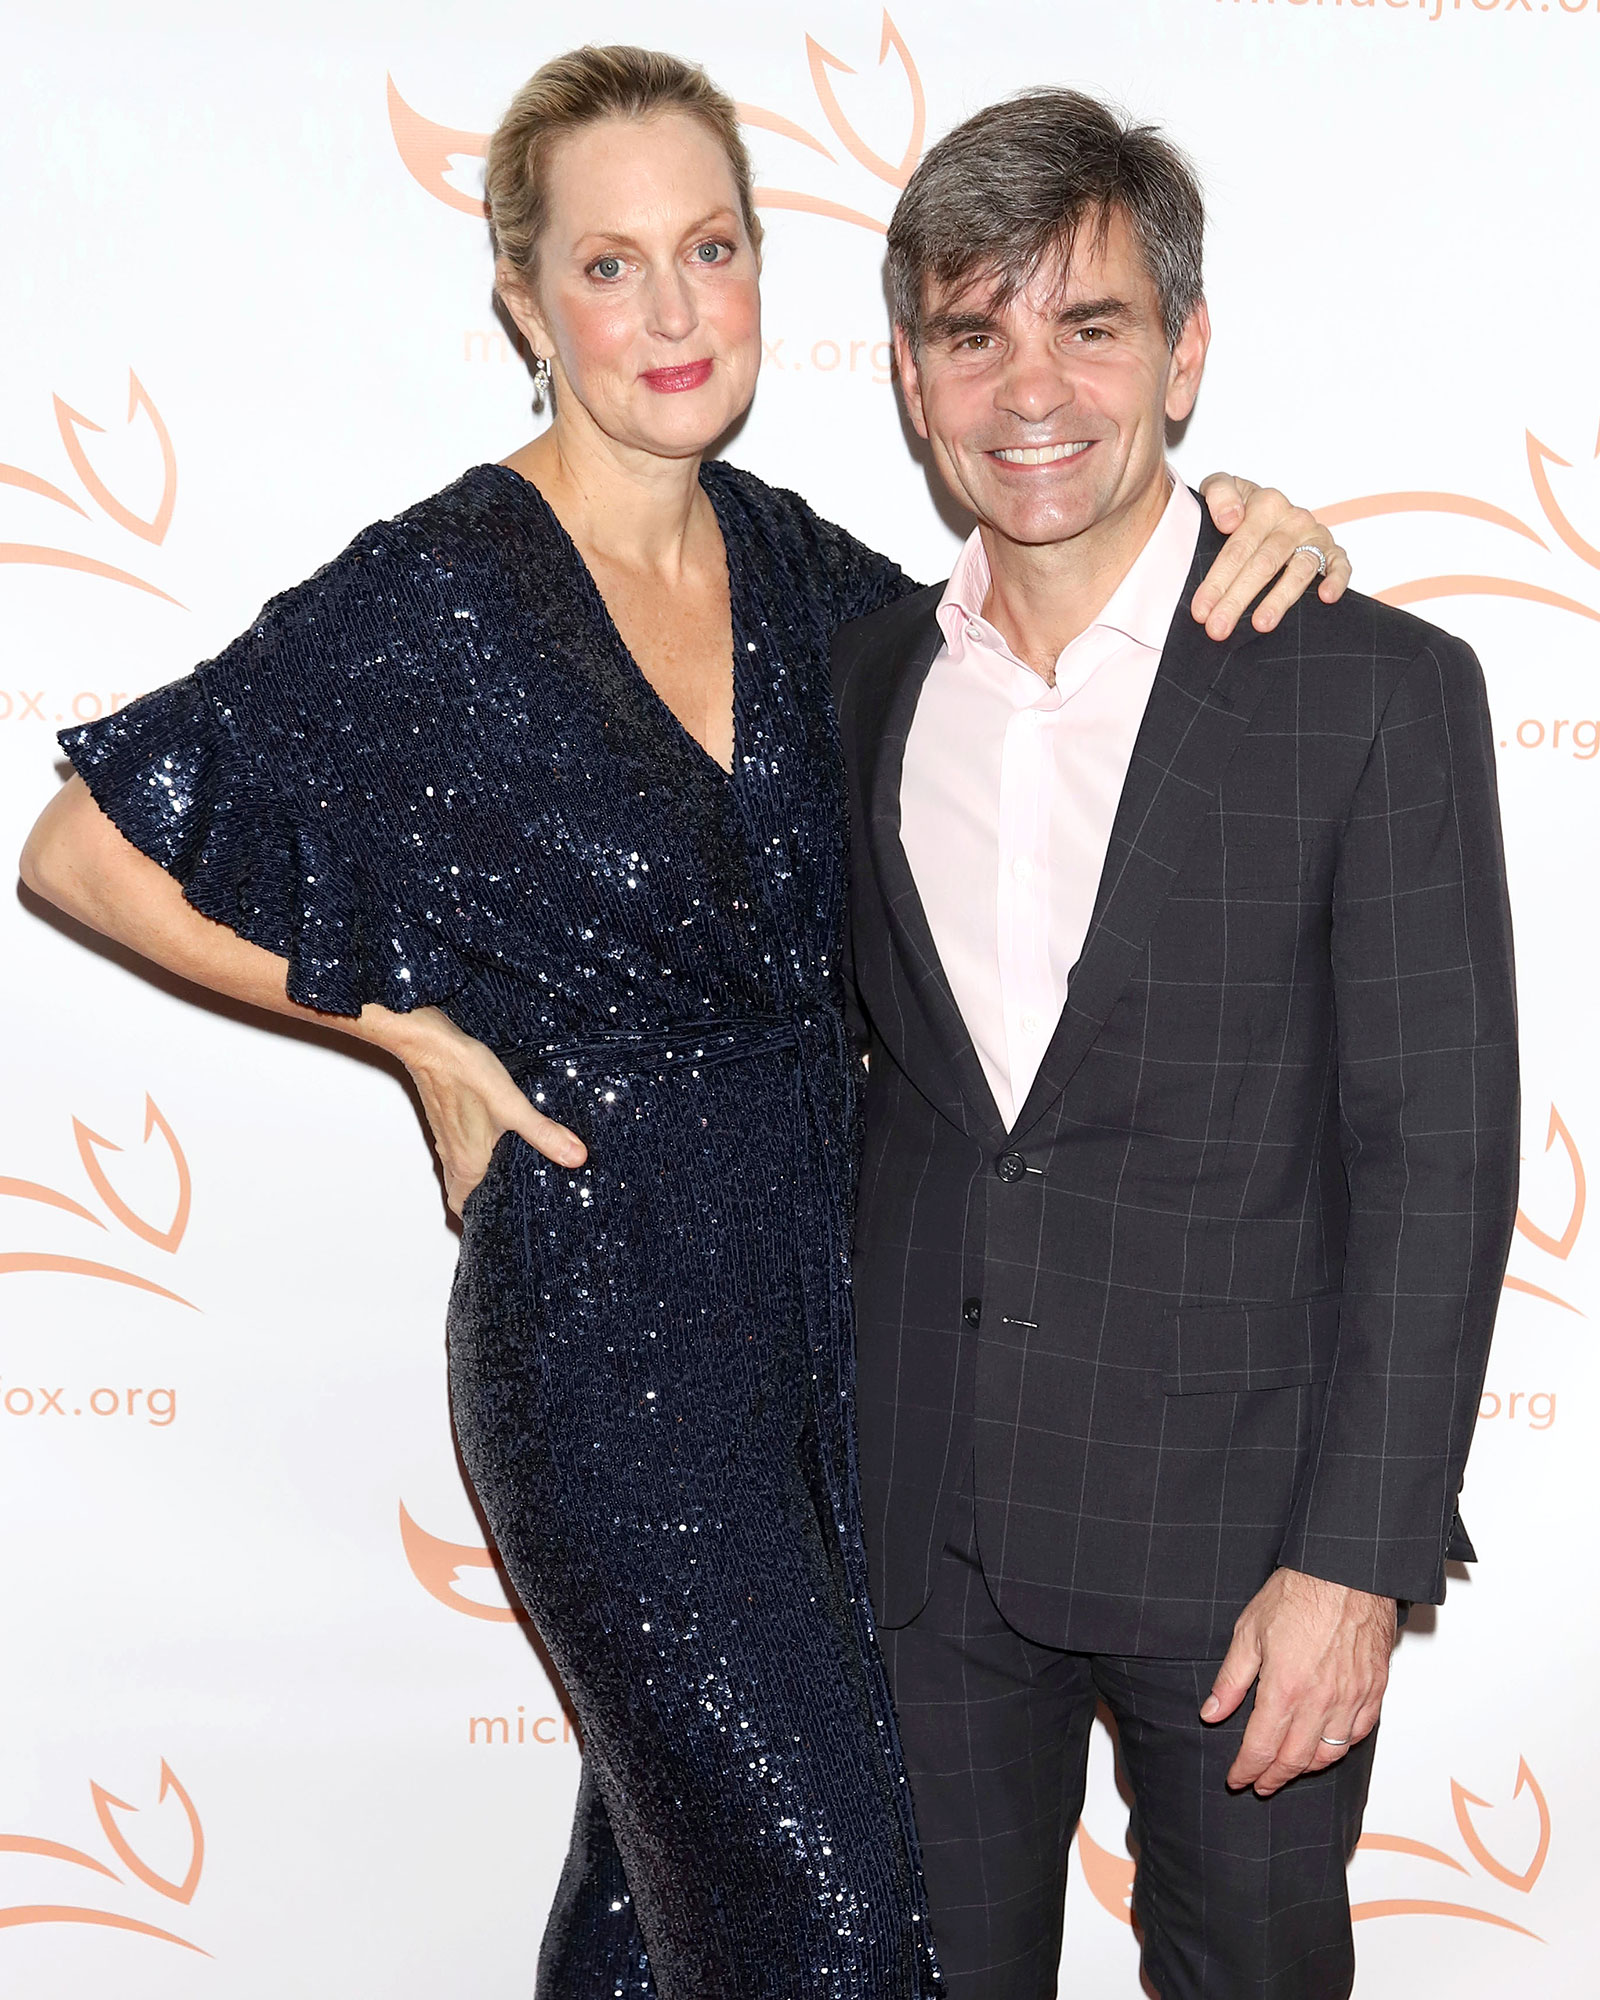 George Stephanopoulos Tests Positive for Coronavirus 2 Weeks After Wife Ali Wentworth